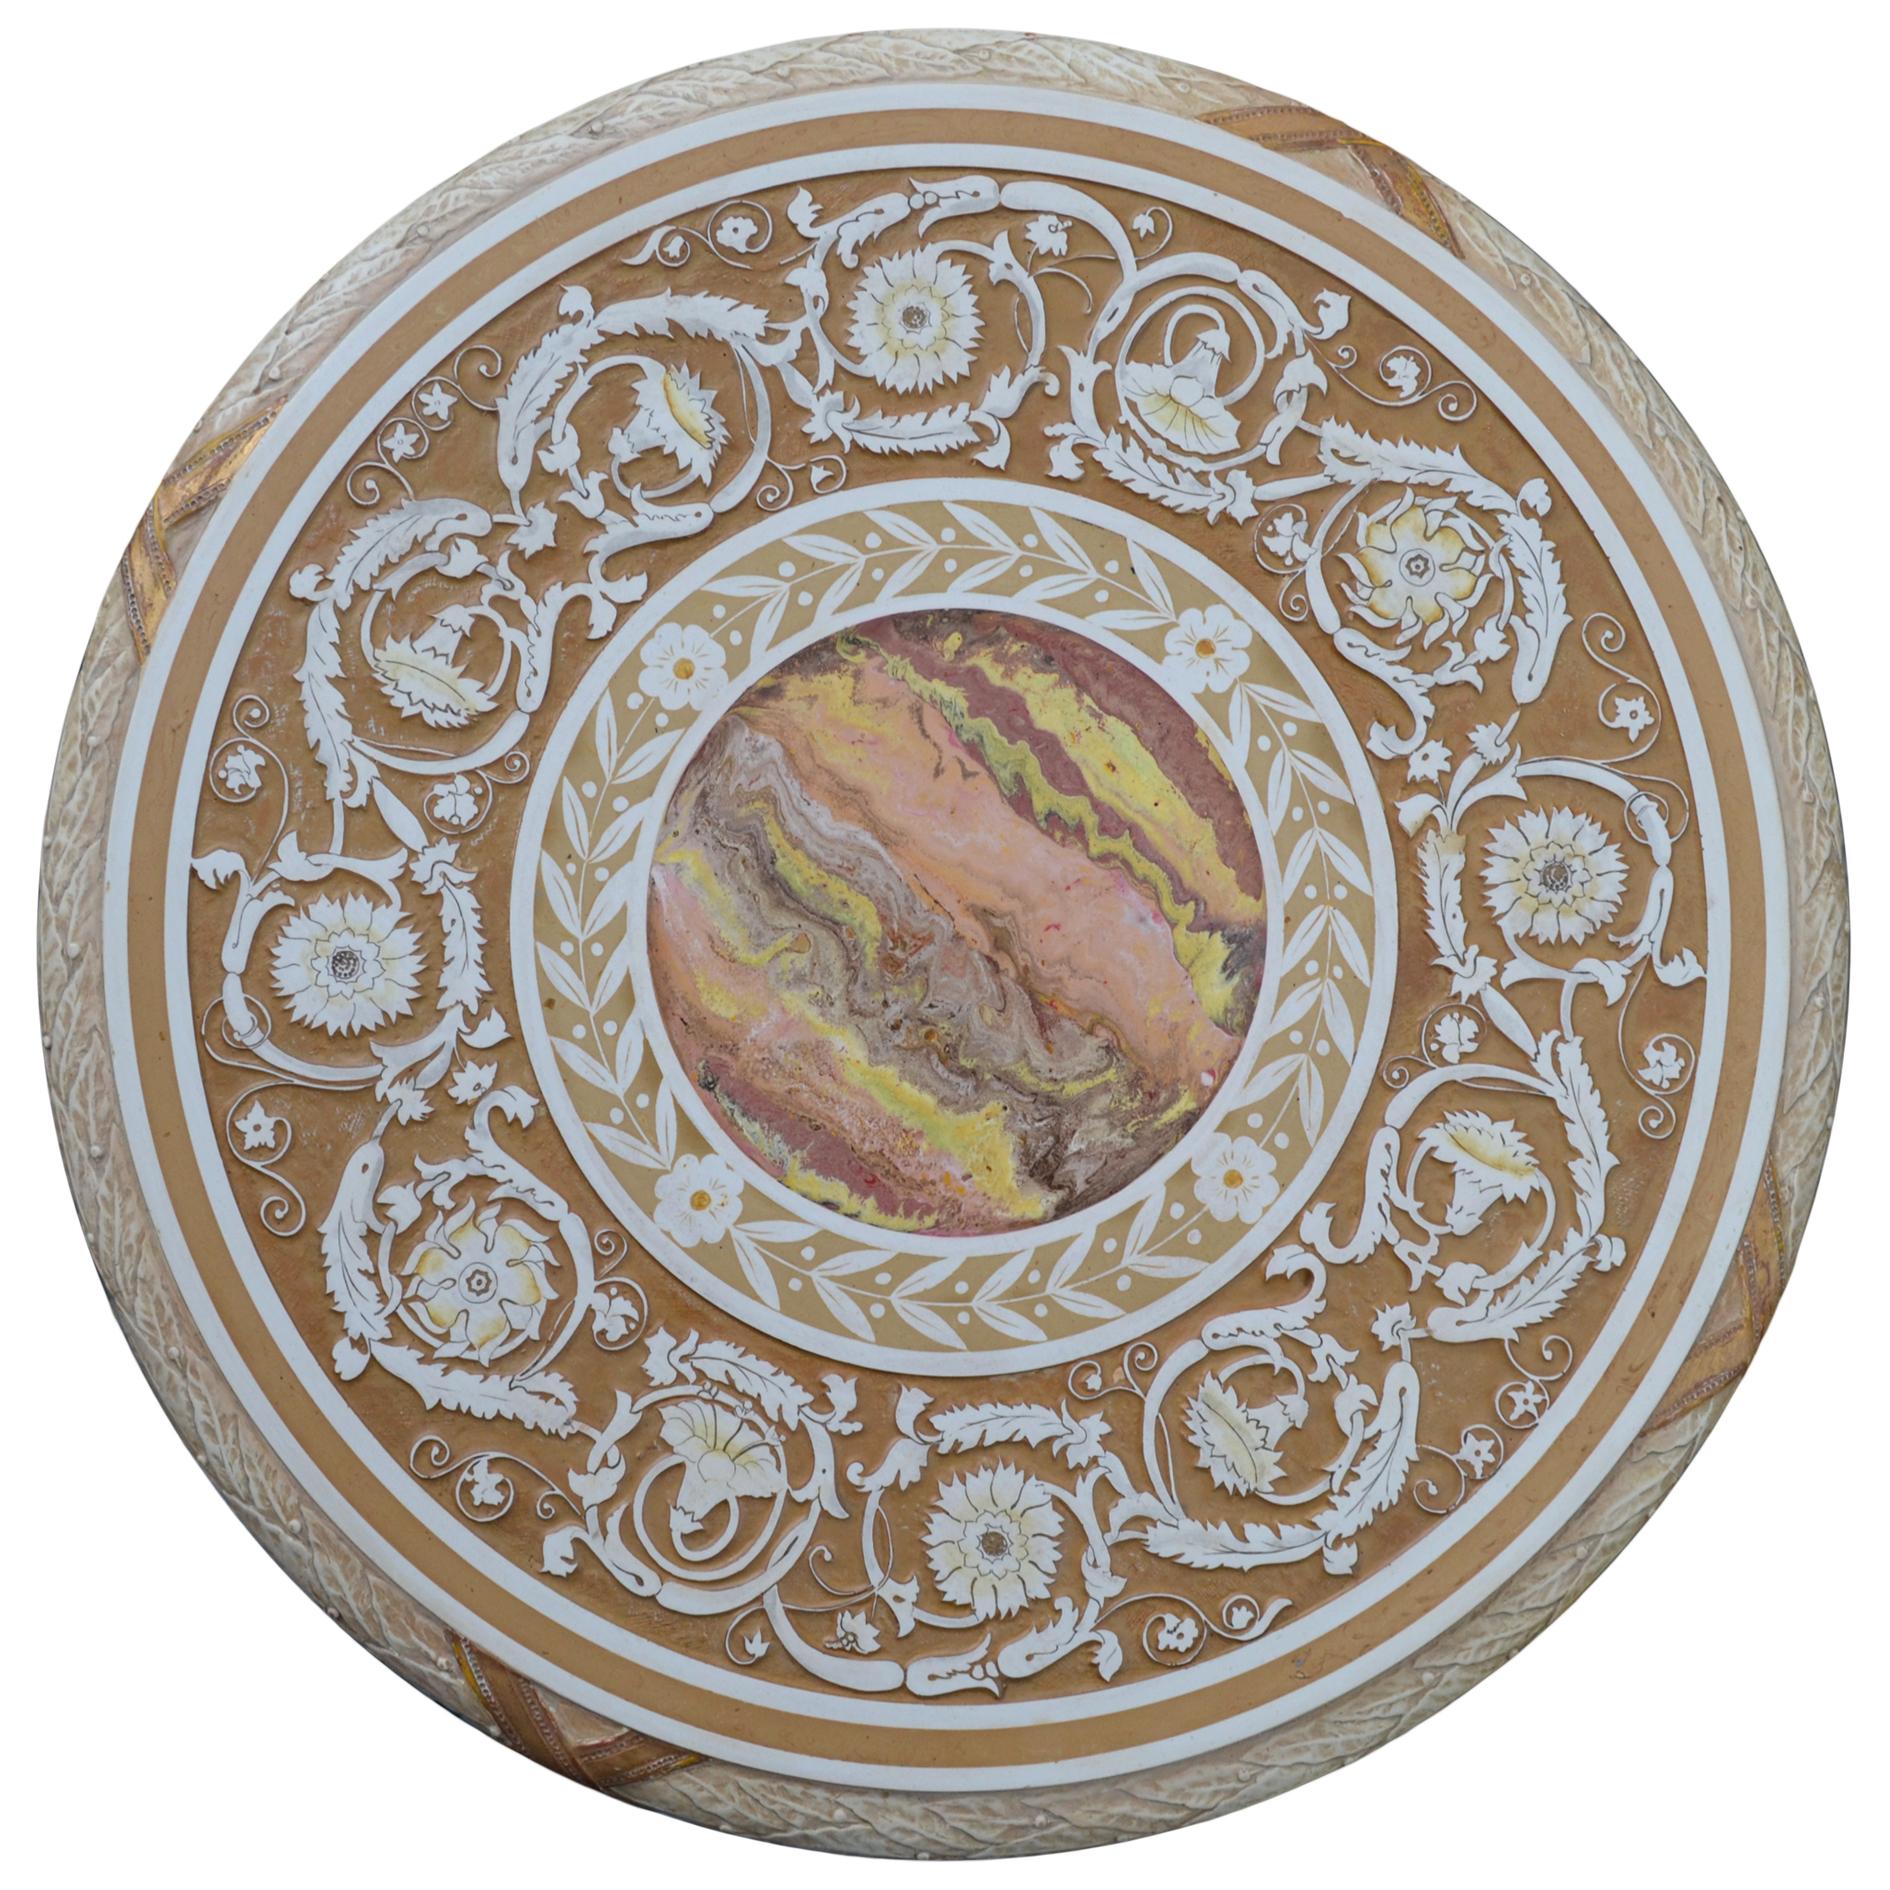 This table can be used as tea table, side table, lamp table it has multiple uses.
The top is manufactured by our Italian craftsmen  in Scagliola art inlay and bas-relief, same technique of the 